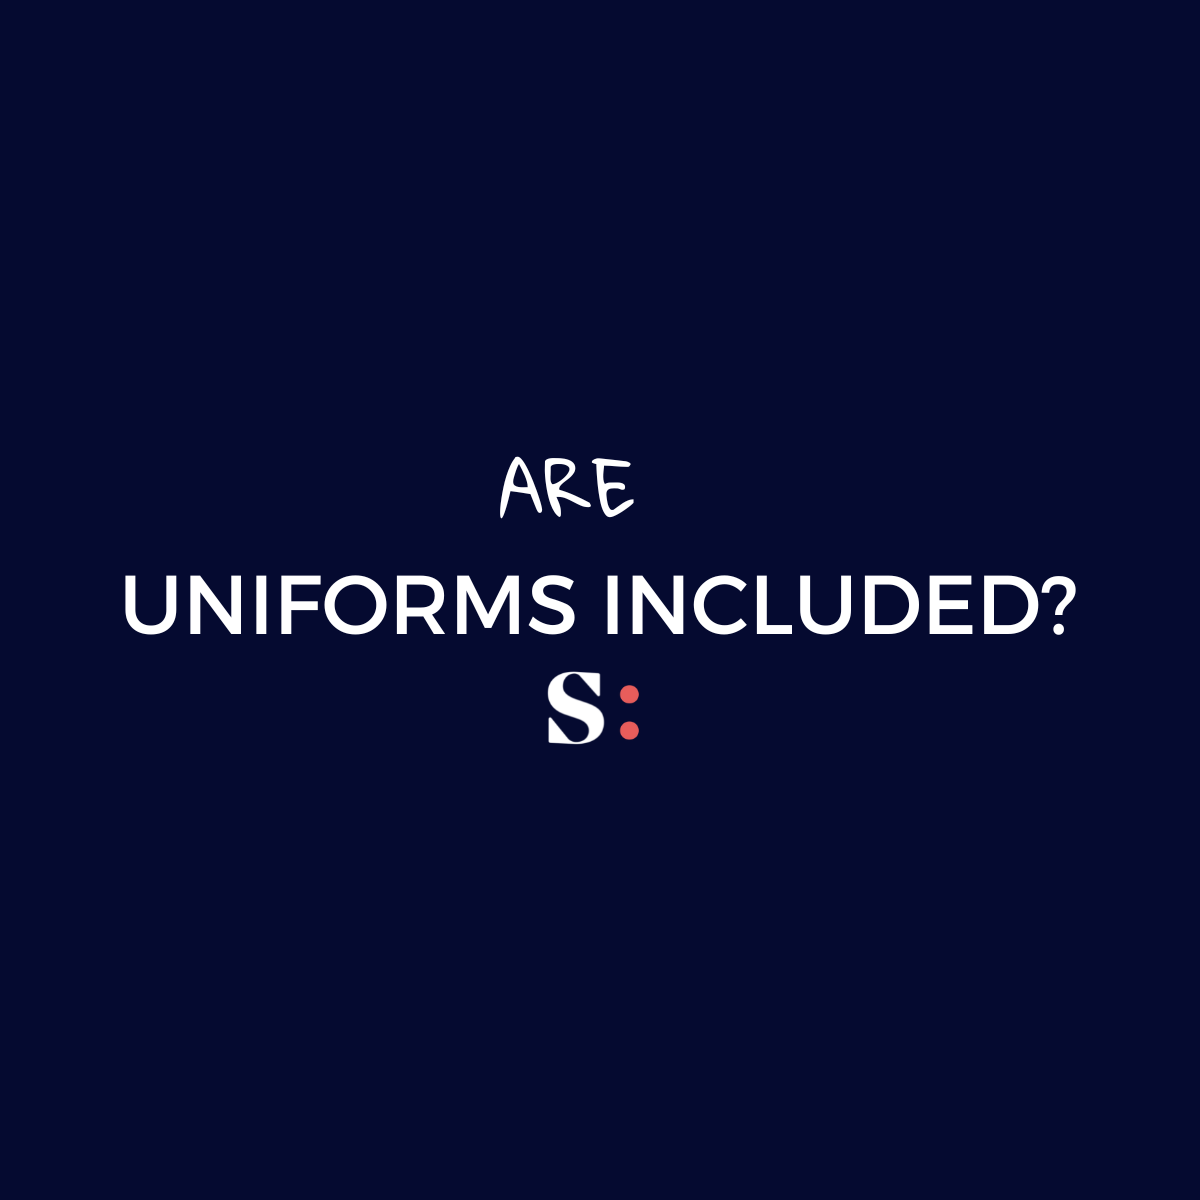 ARE UNIFORMS INCLUDED?